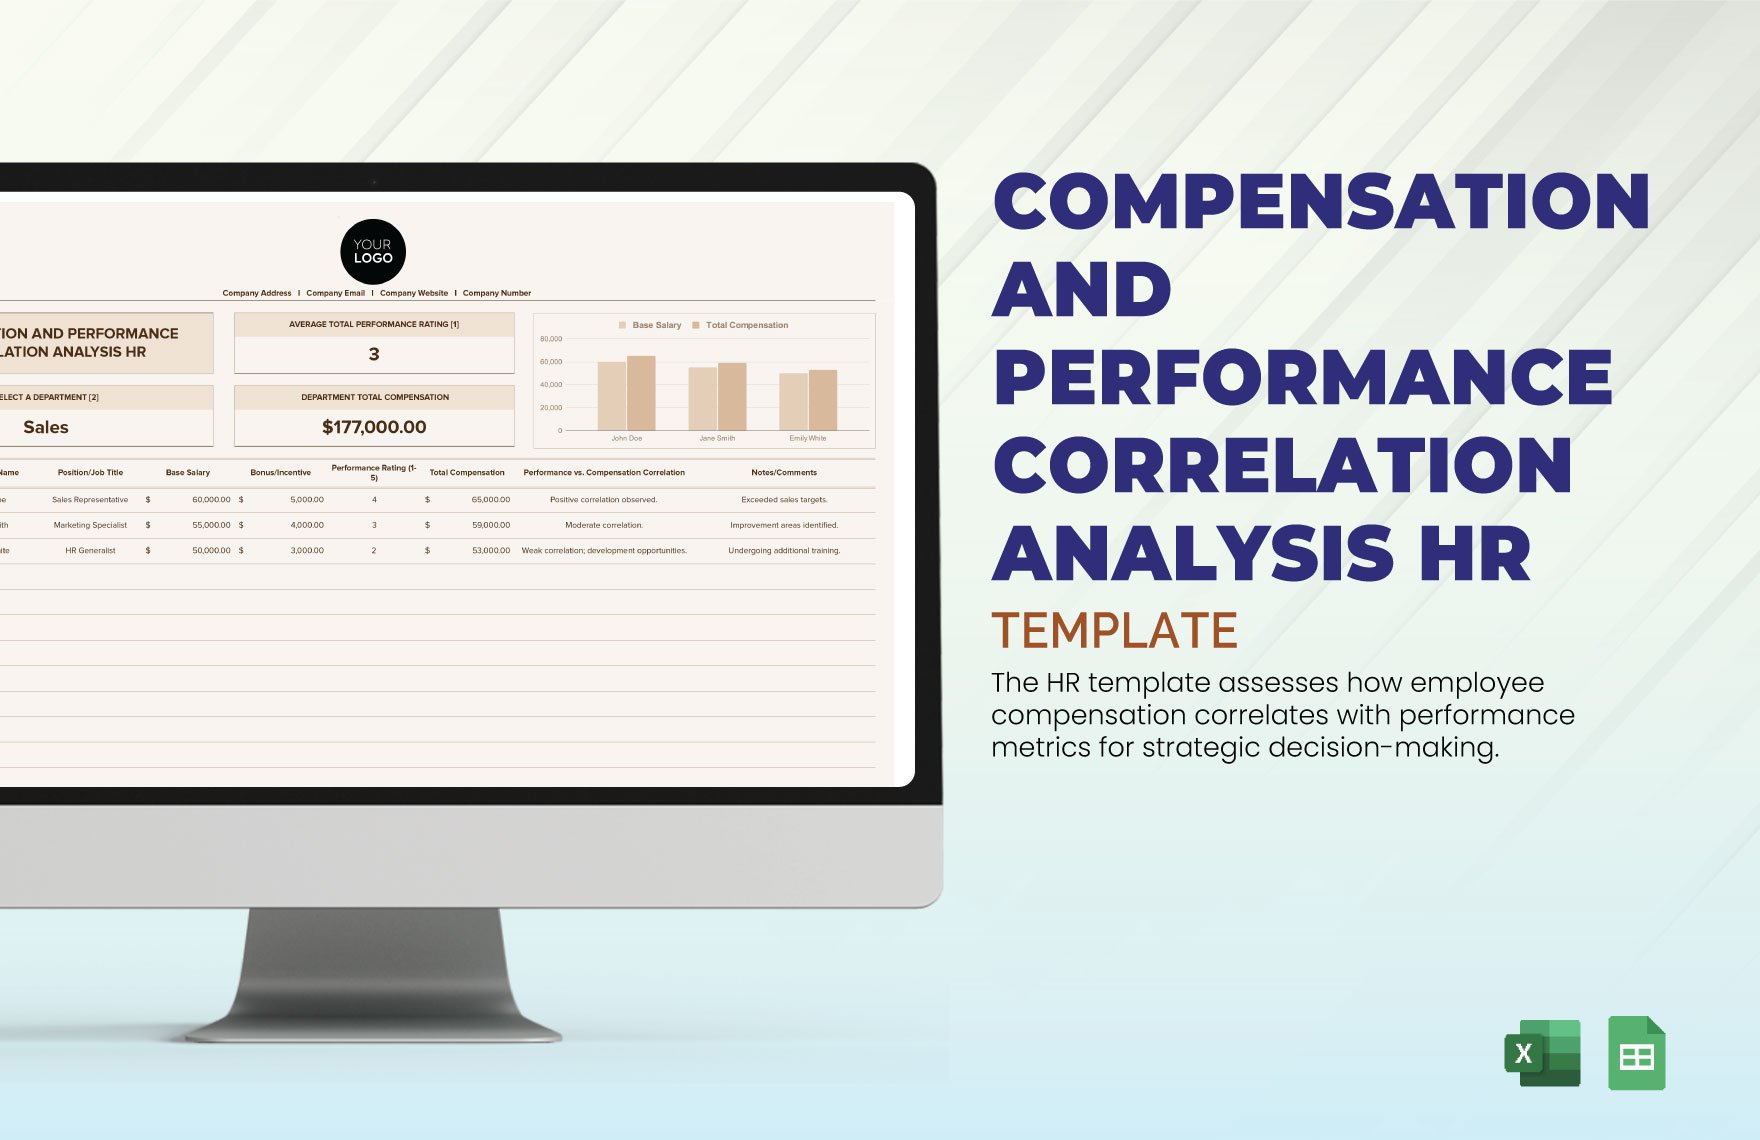 Compensation and Performance Correlation Analysis HR Template